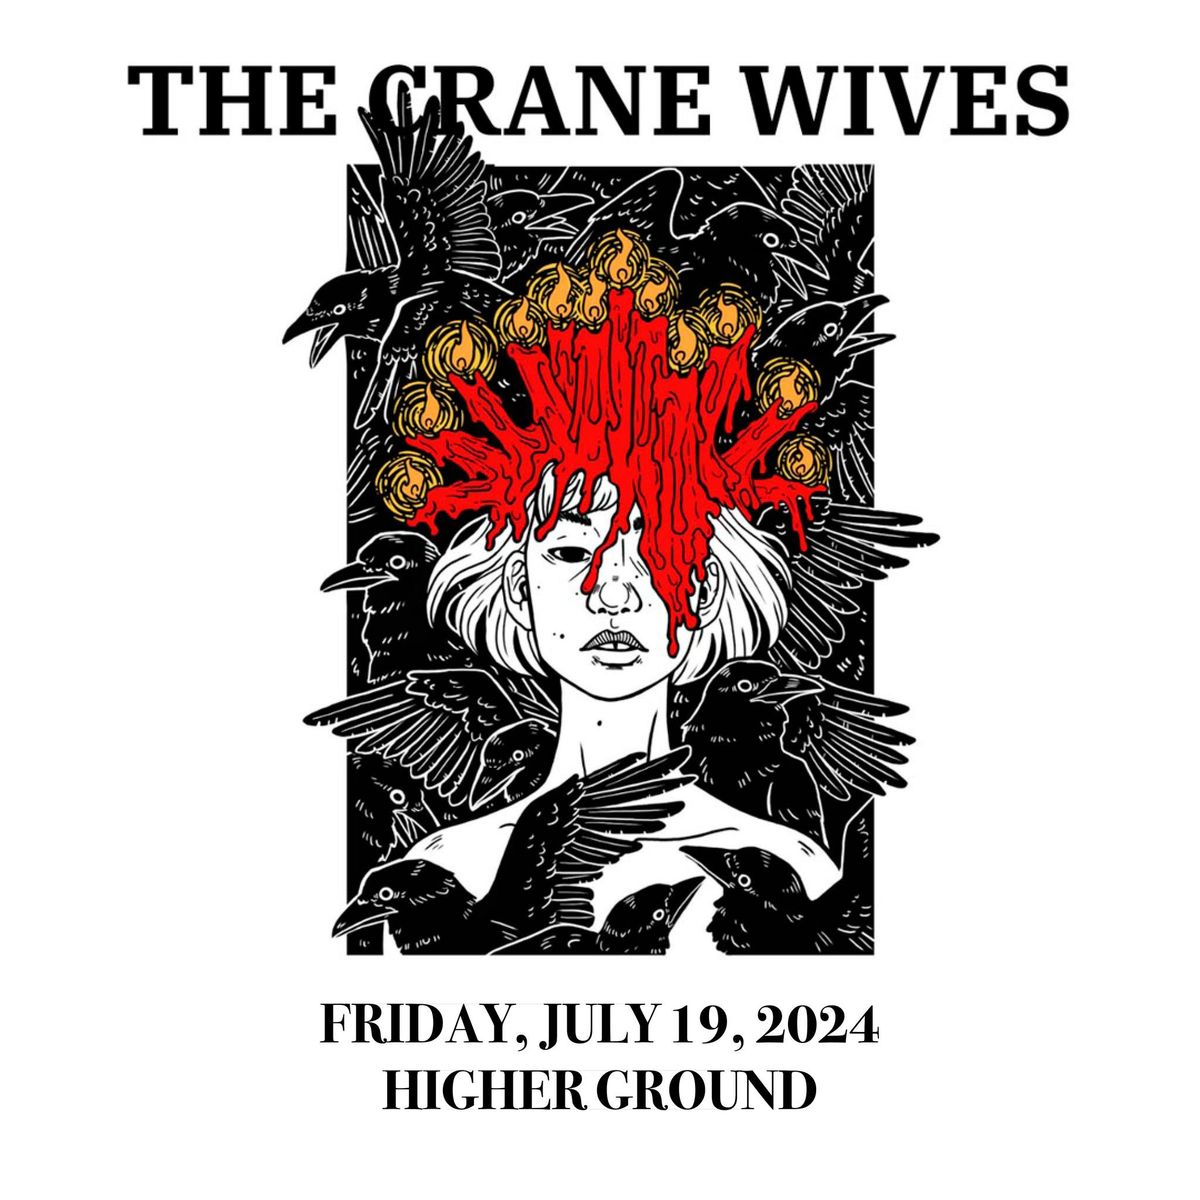 The Crane Wives at Higher Ground